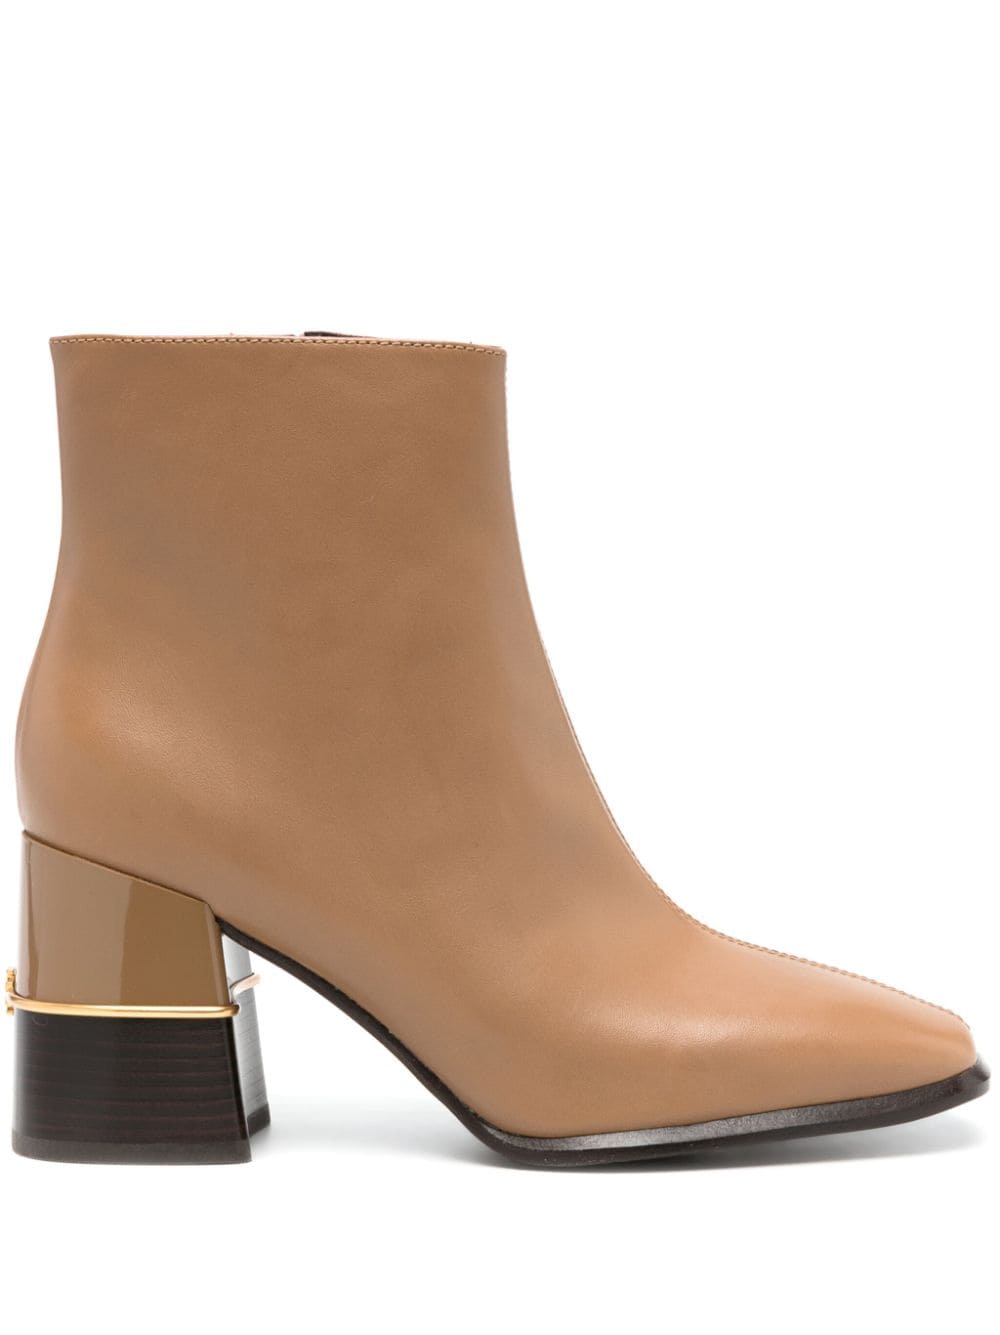 Tory Burch Double T 75mm leather ankle boots - Neutrals von Tory Burch